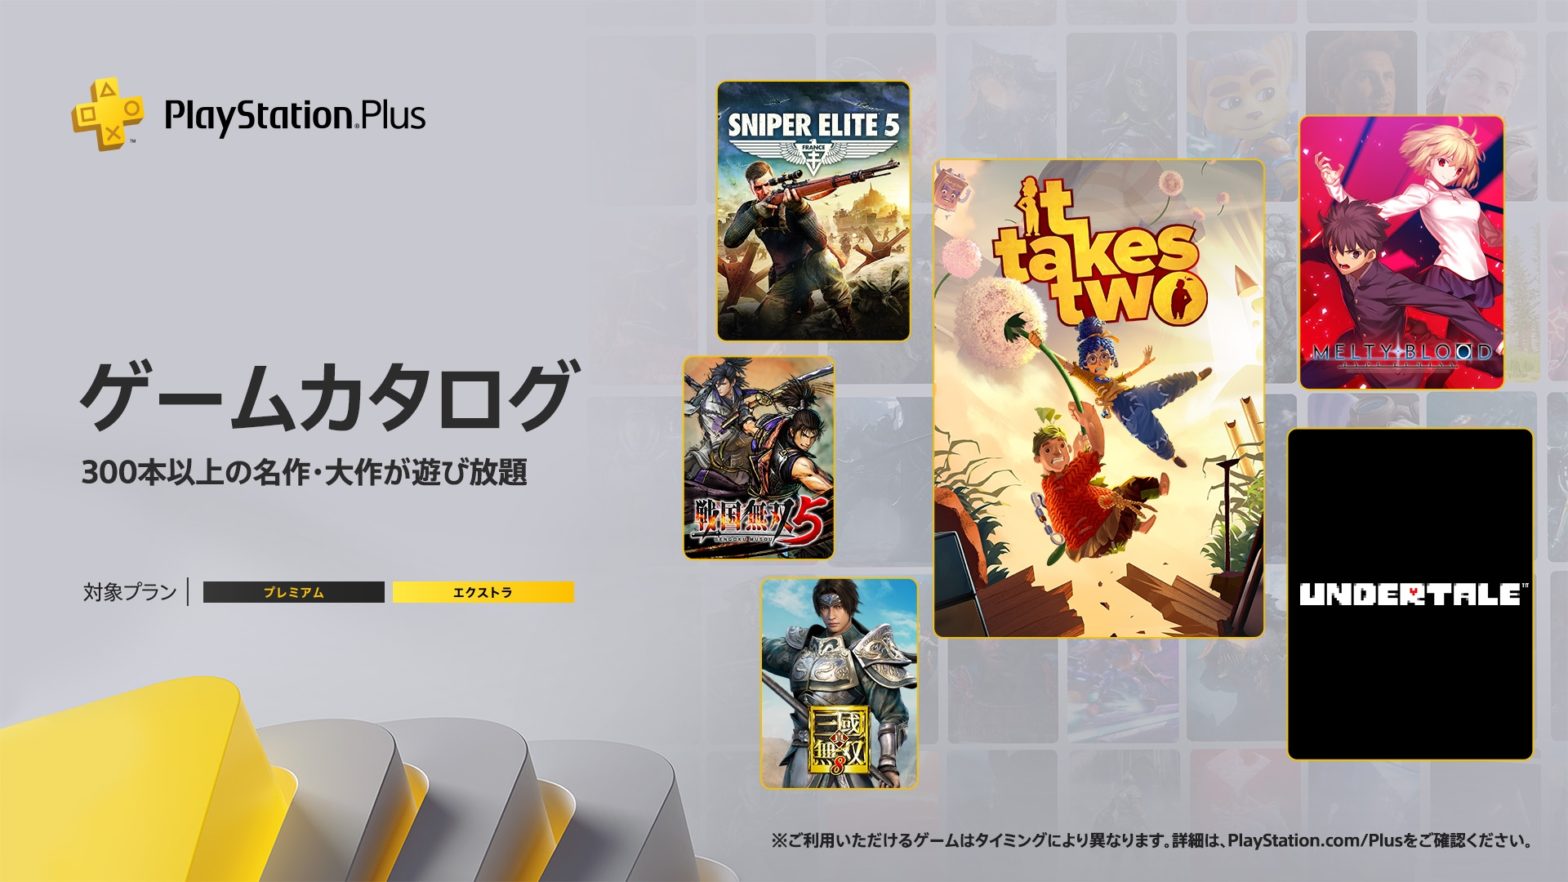 MBTL will be added to the PS Plus Game Catalogue.